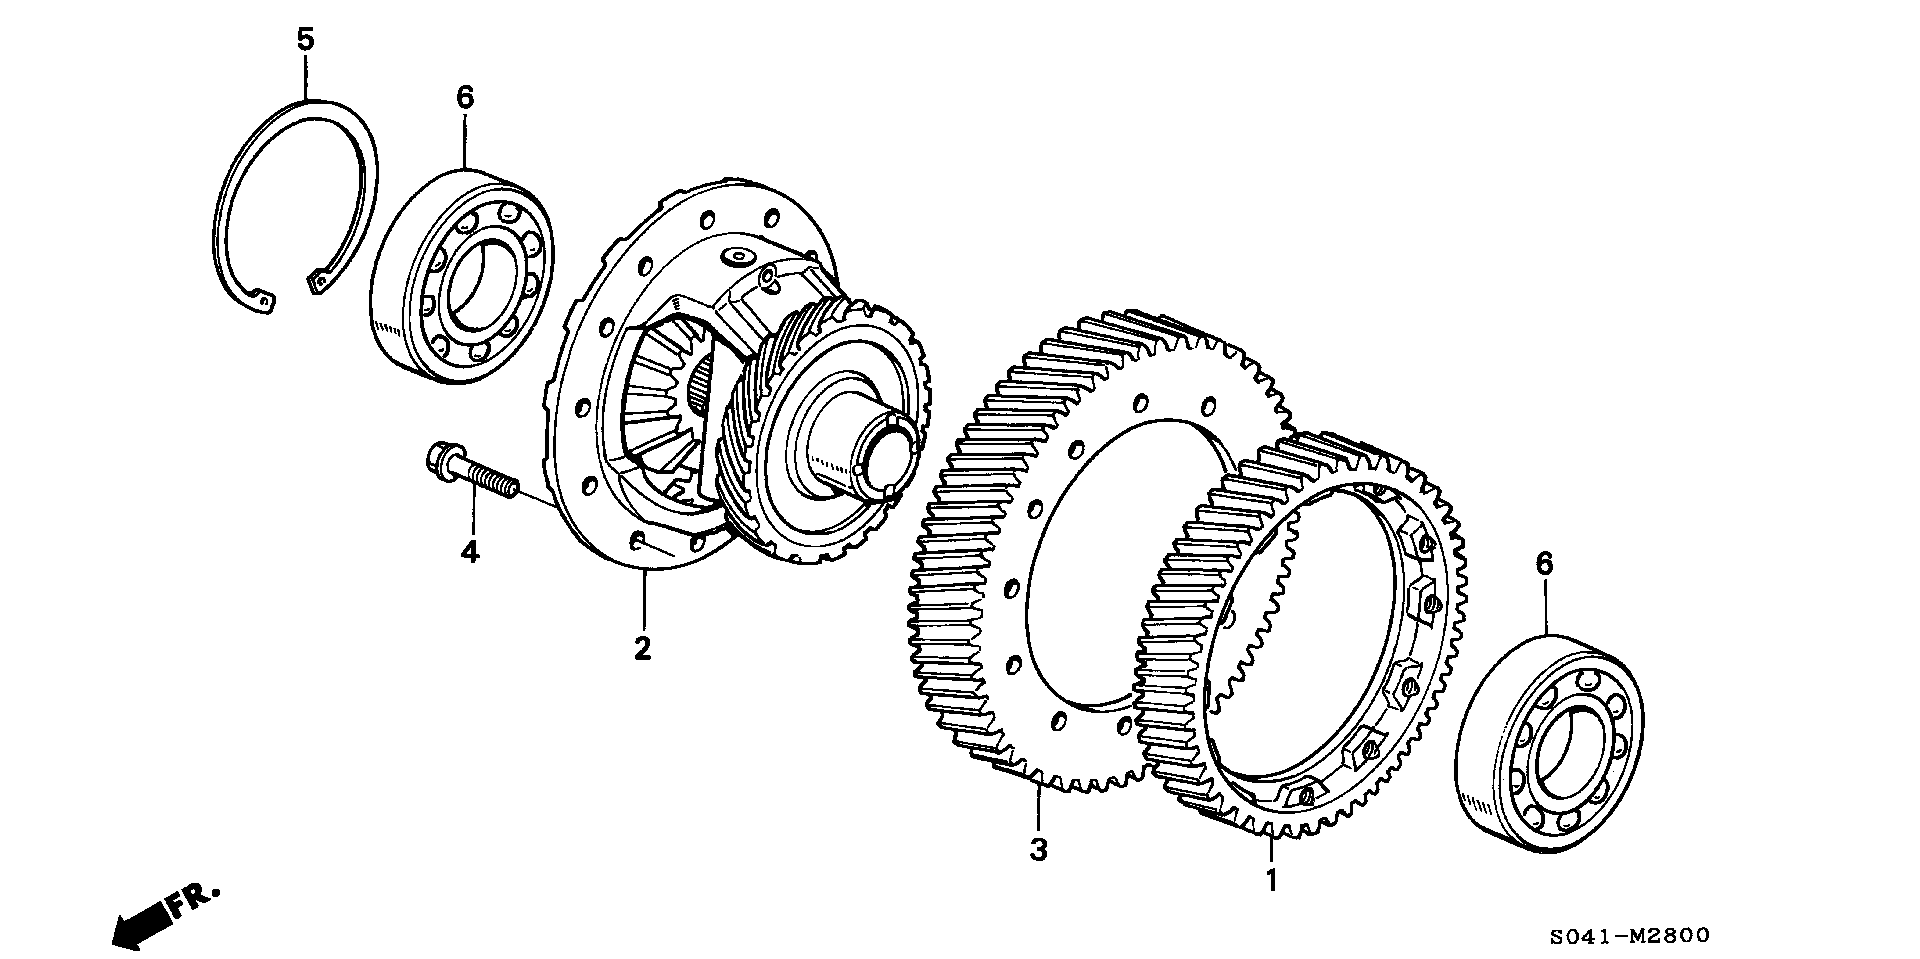 DIFFERENTIAL (4WD)